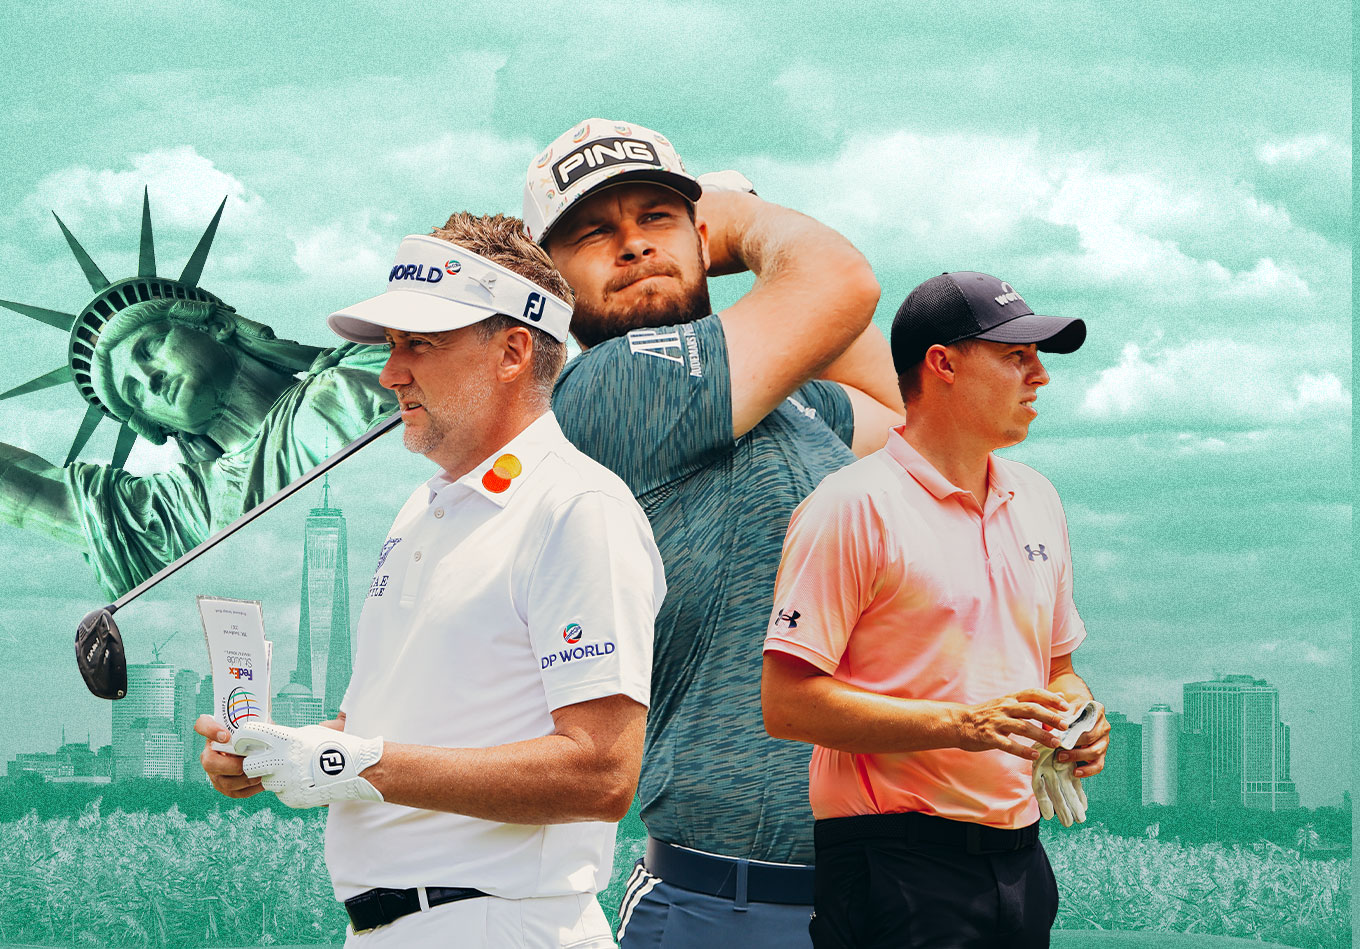 66 for 11: Our Model Projects Who Will Advance in the FedEx Cup Playoffs